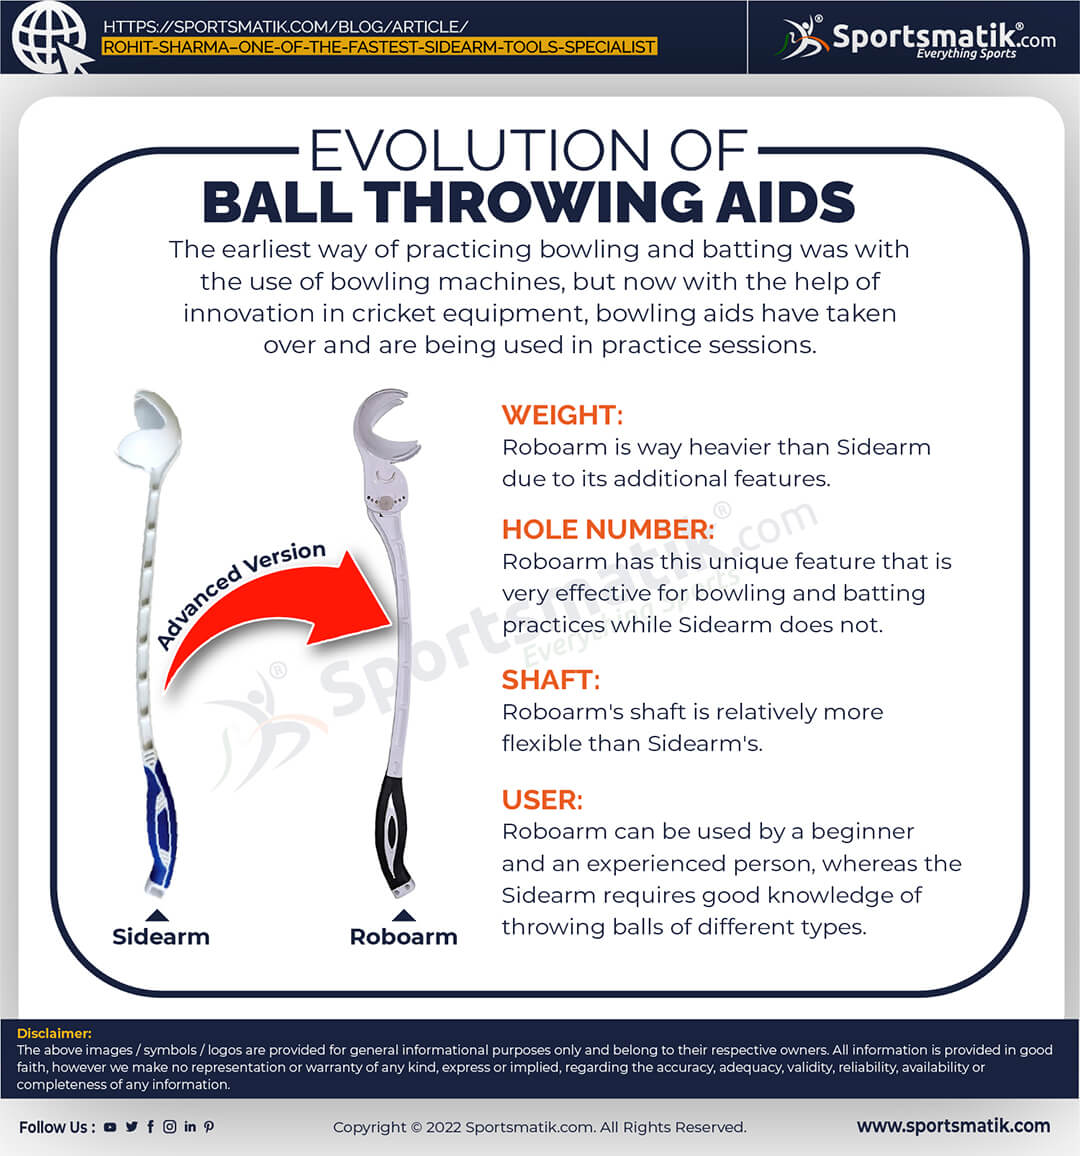 Evolution of ball throwing aids